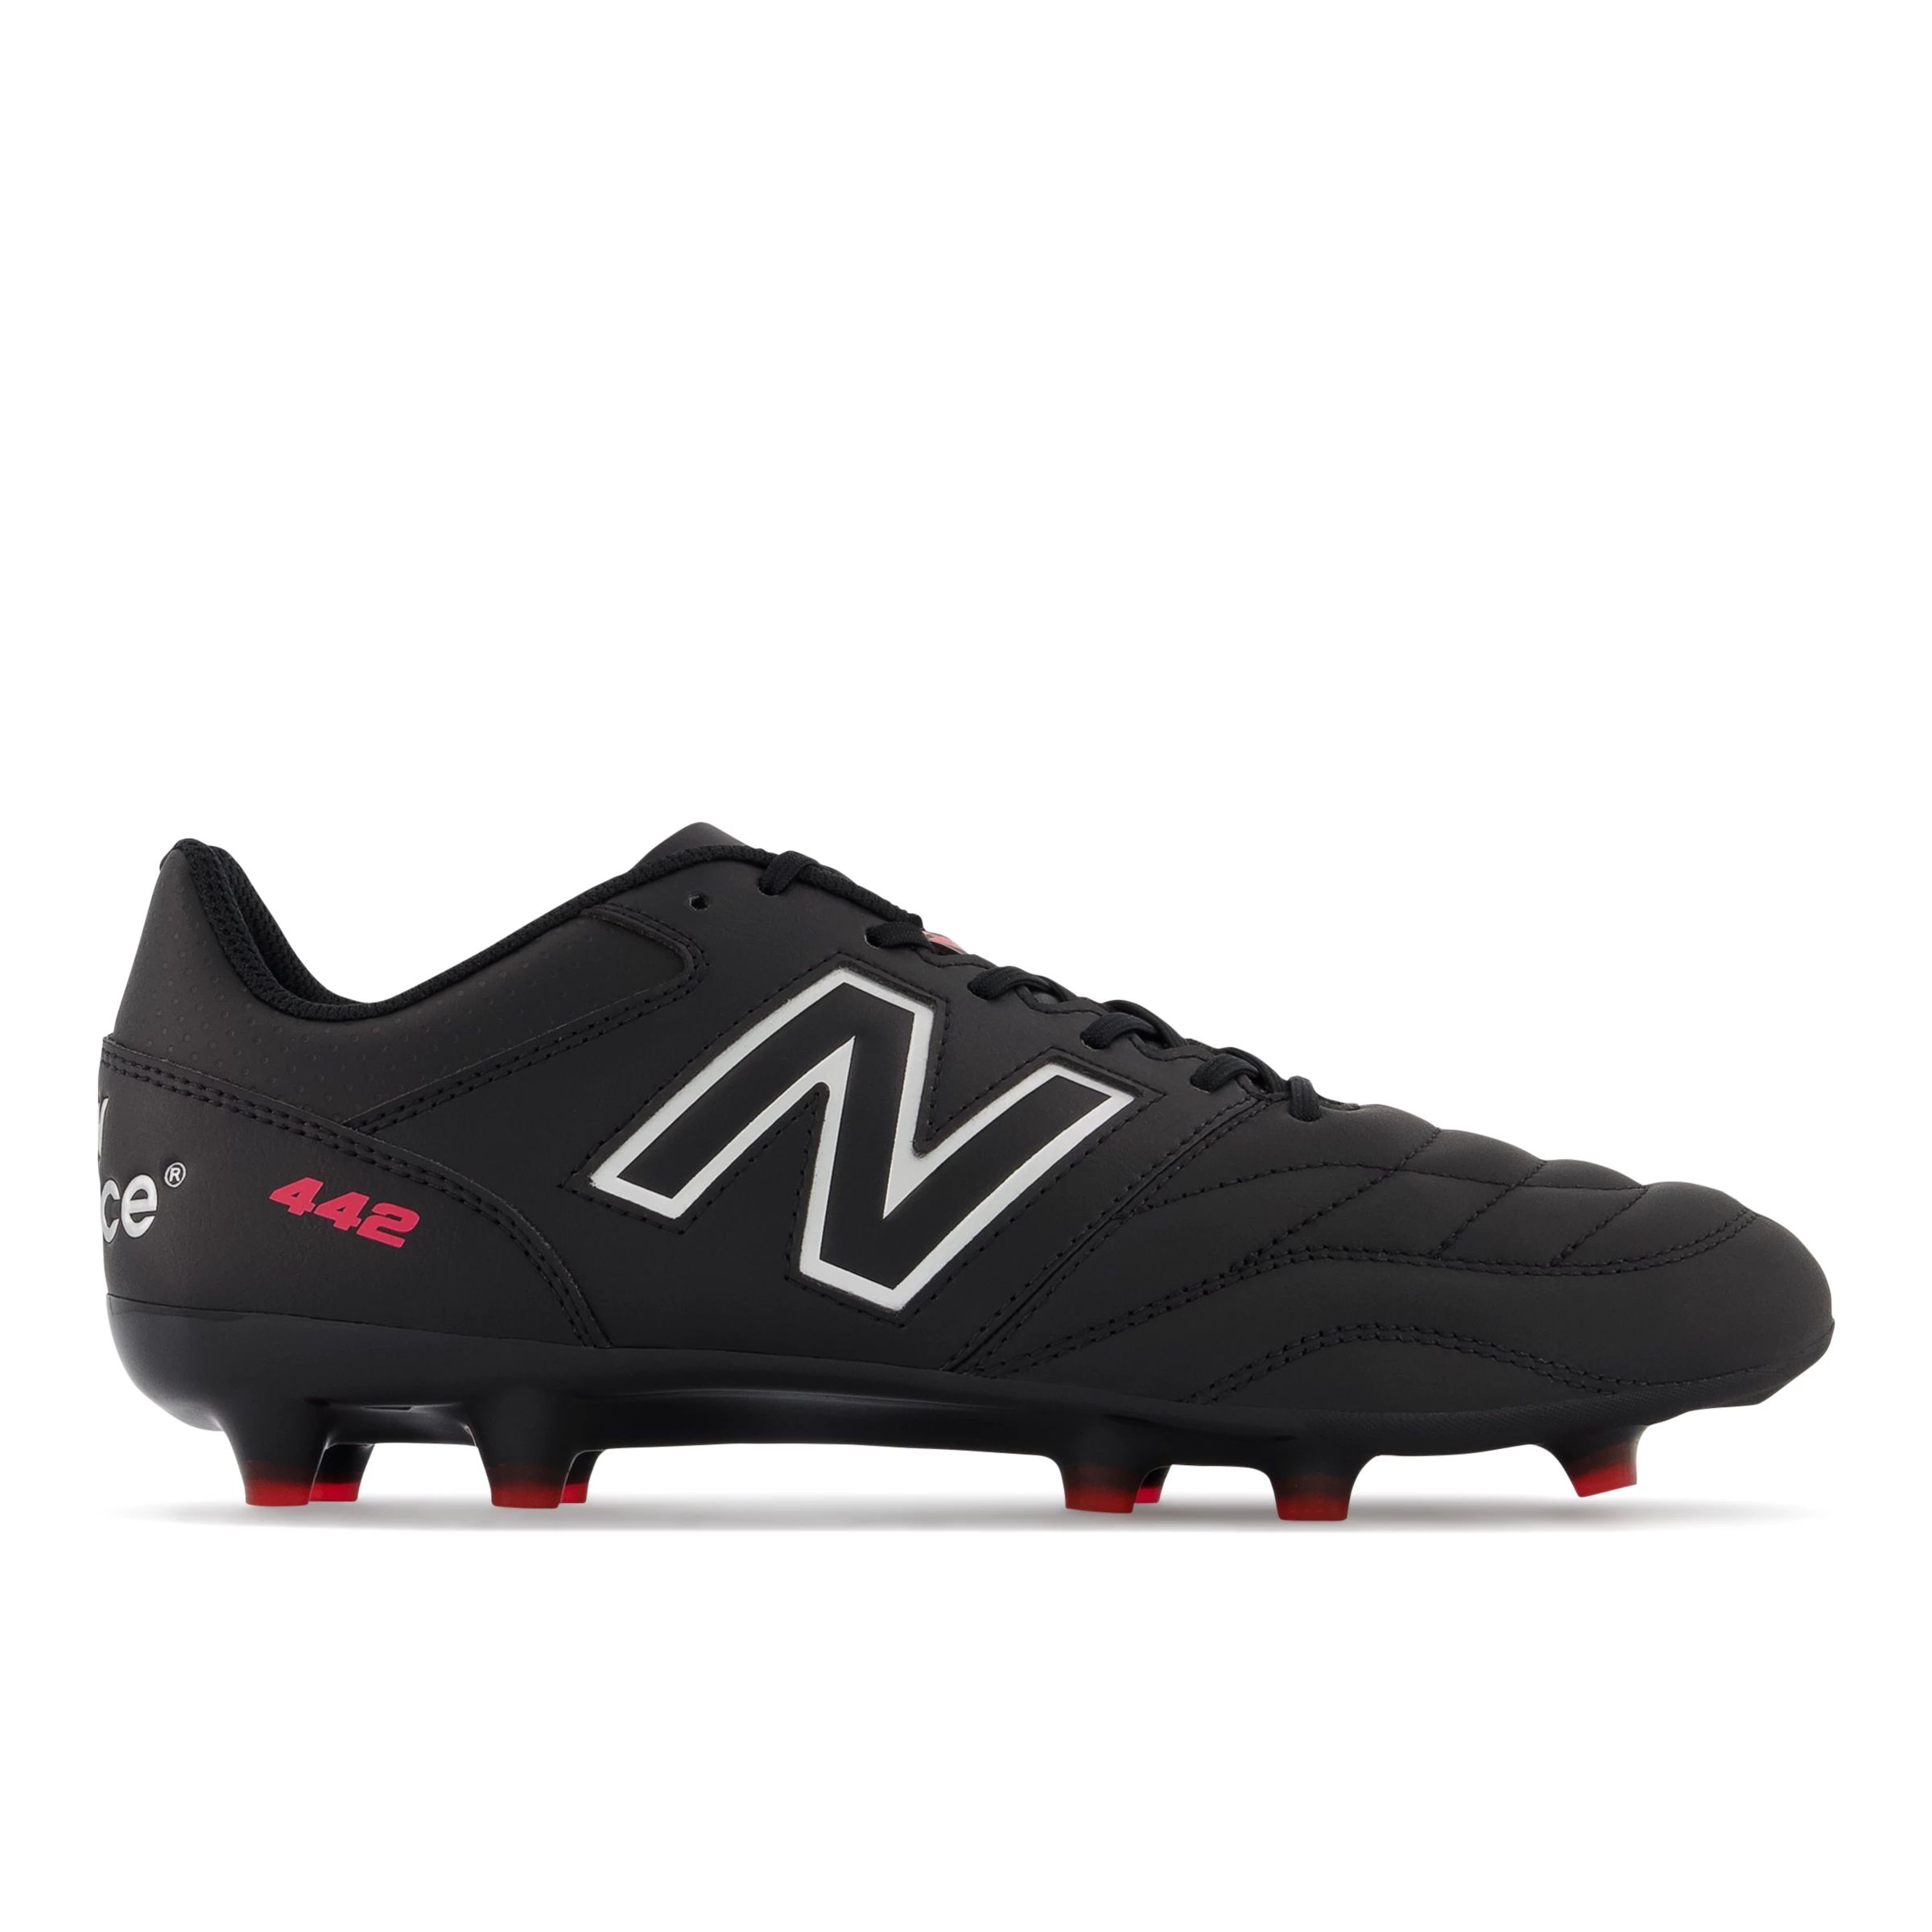 Image of New Balance Men's 442V2 Pro Firm Ground 2E Soccer Shoes Cleats